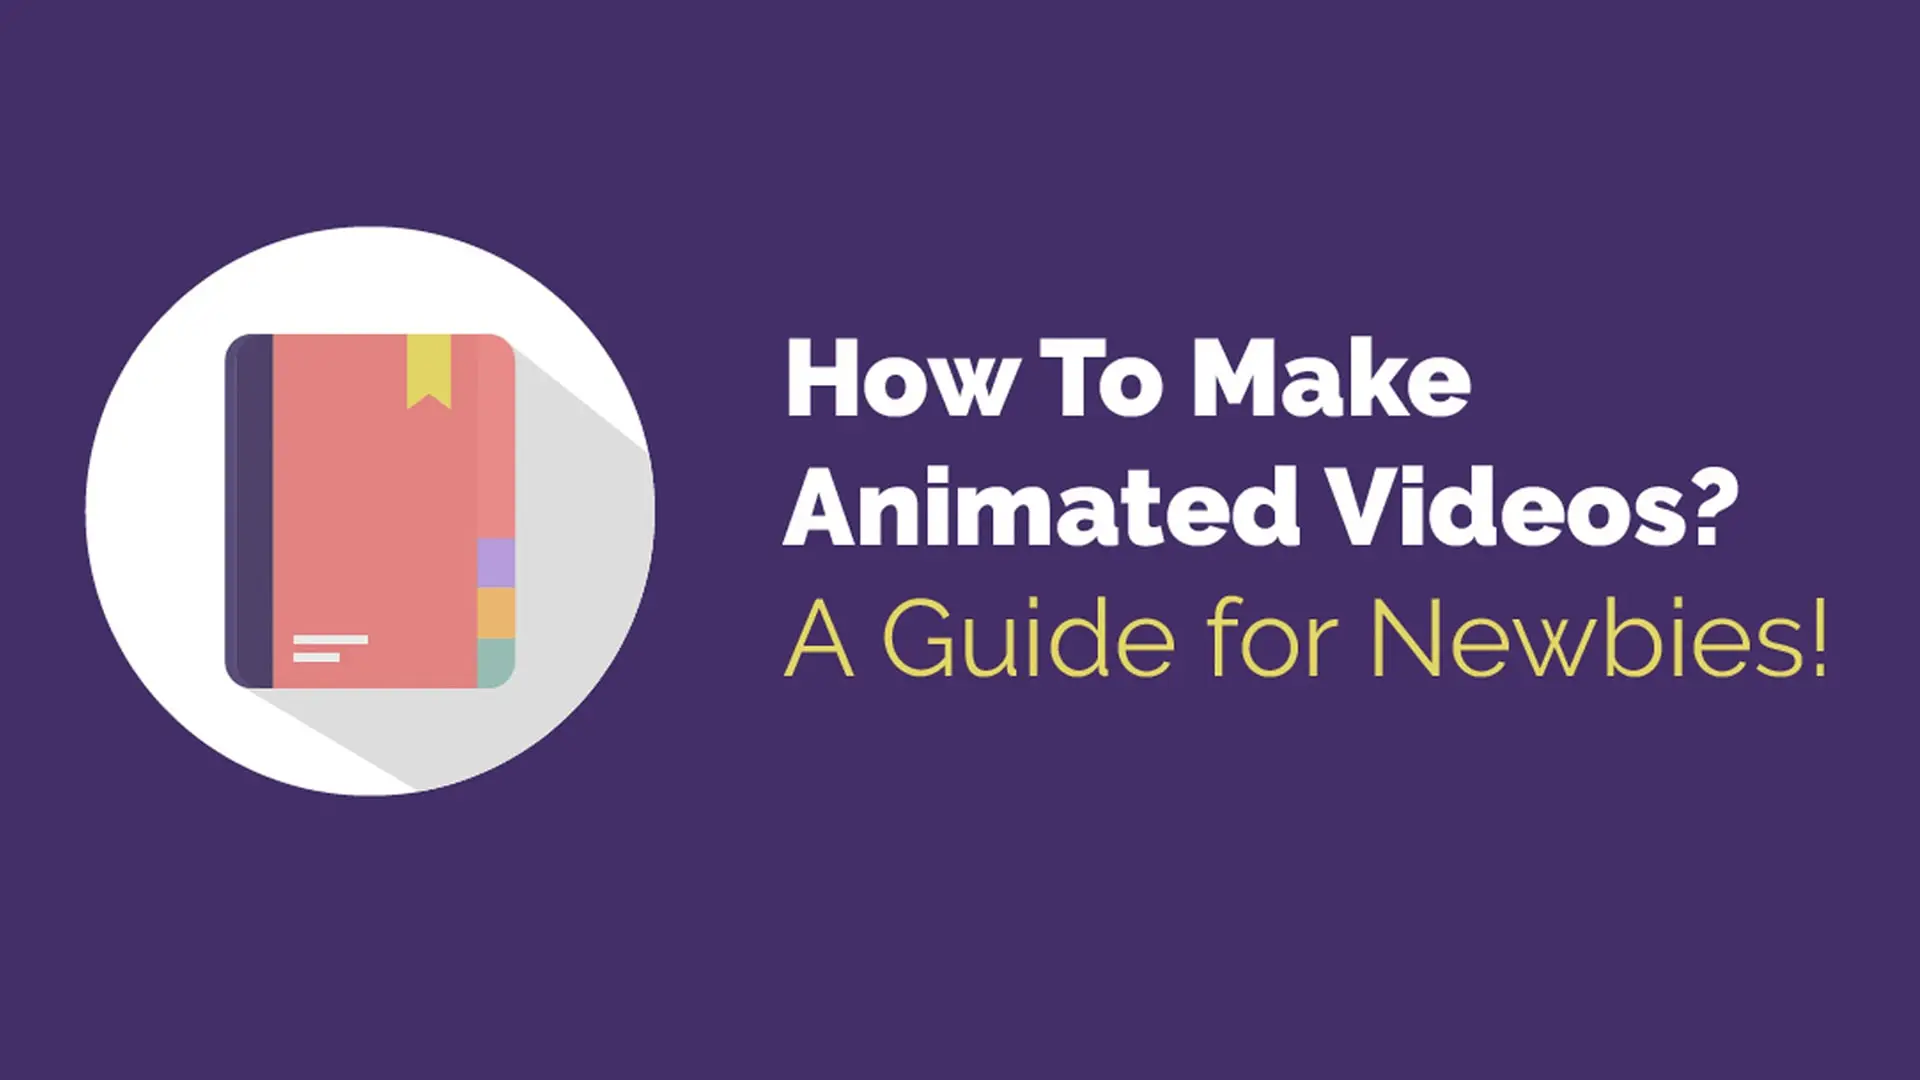 how to make animated videos